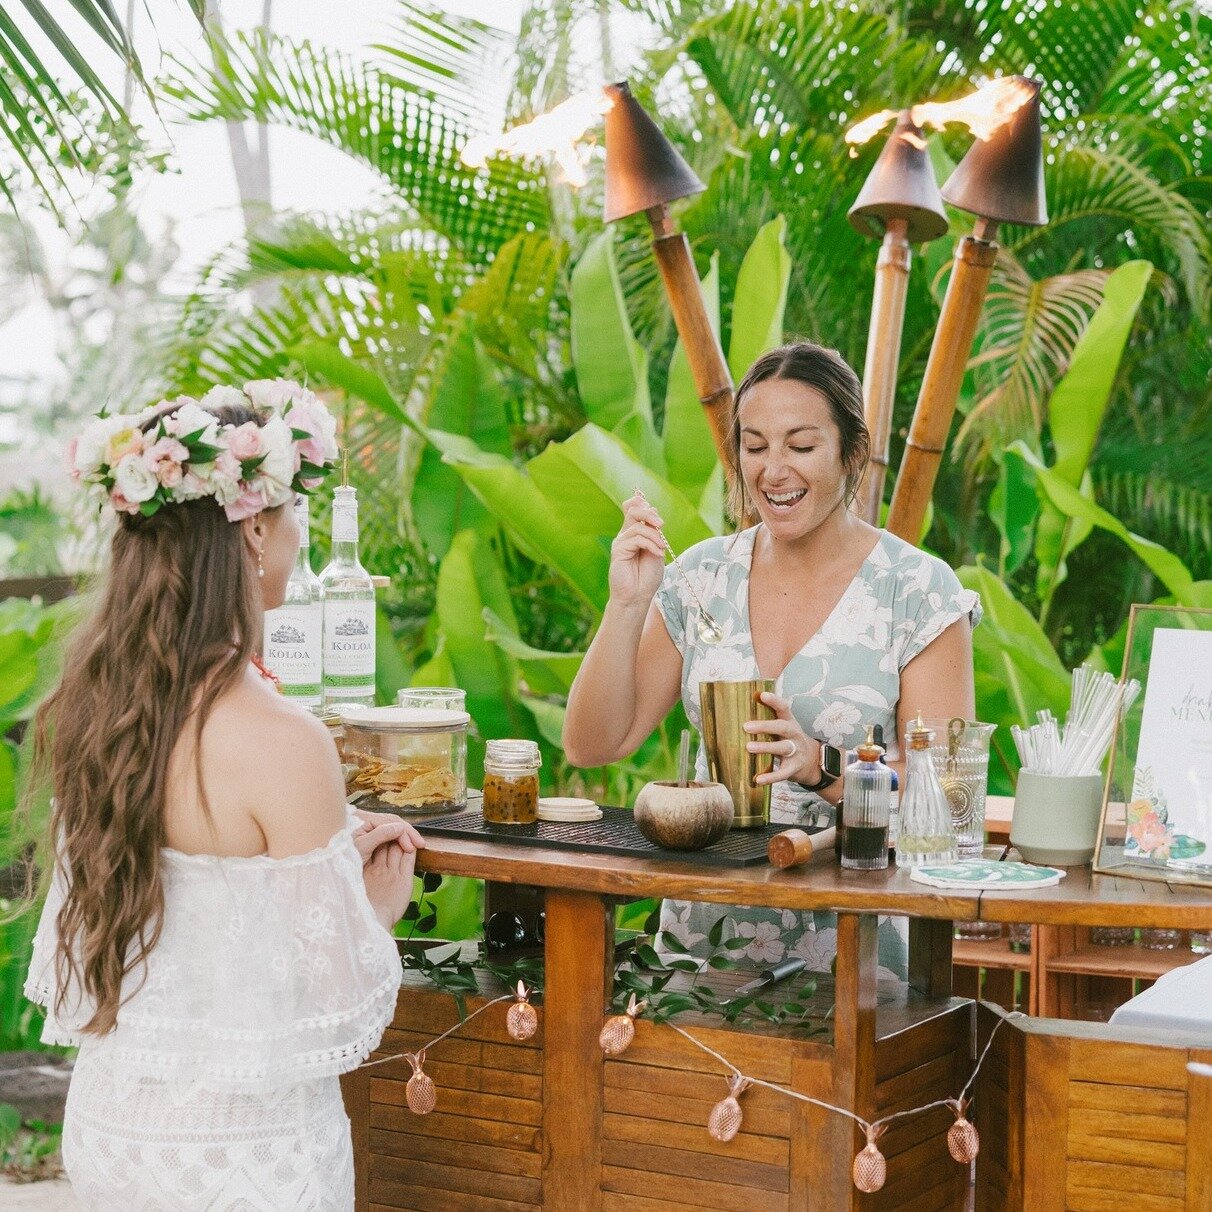 Mixing up something truly magical for the radiant bride on her wedding day! 🌺💍 From the first sip to the last dance, let's toast to love, laughter, and a lifetime of cherished memories. Cheers to the beautiful journey ahead! 

Photo: @_emilychoy 
V